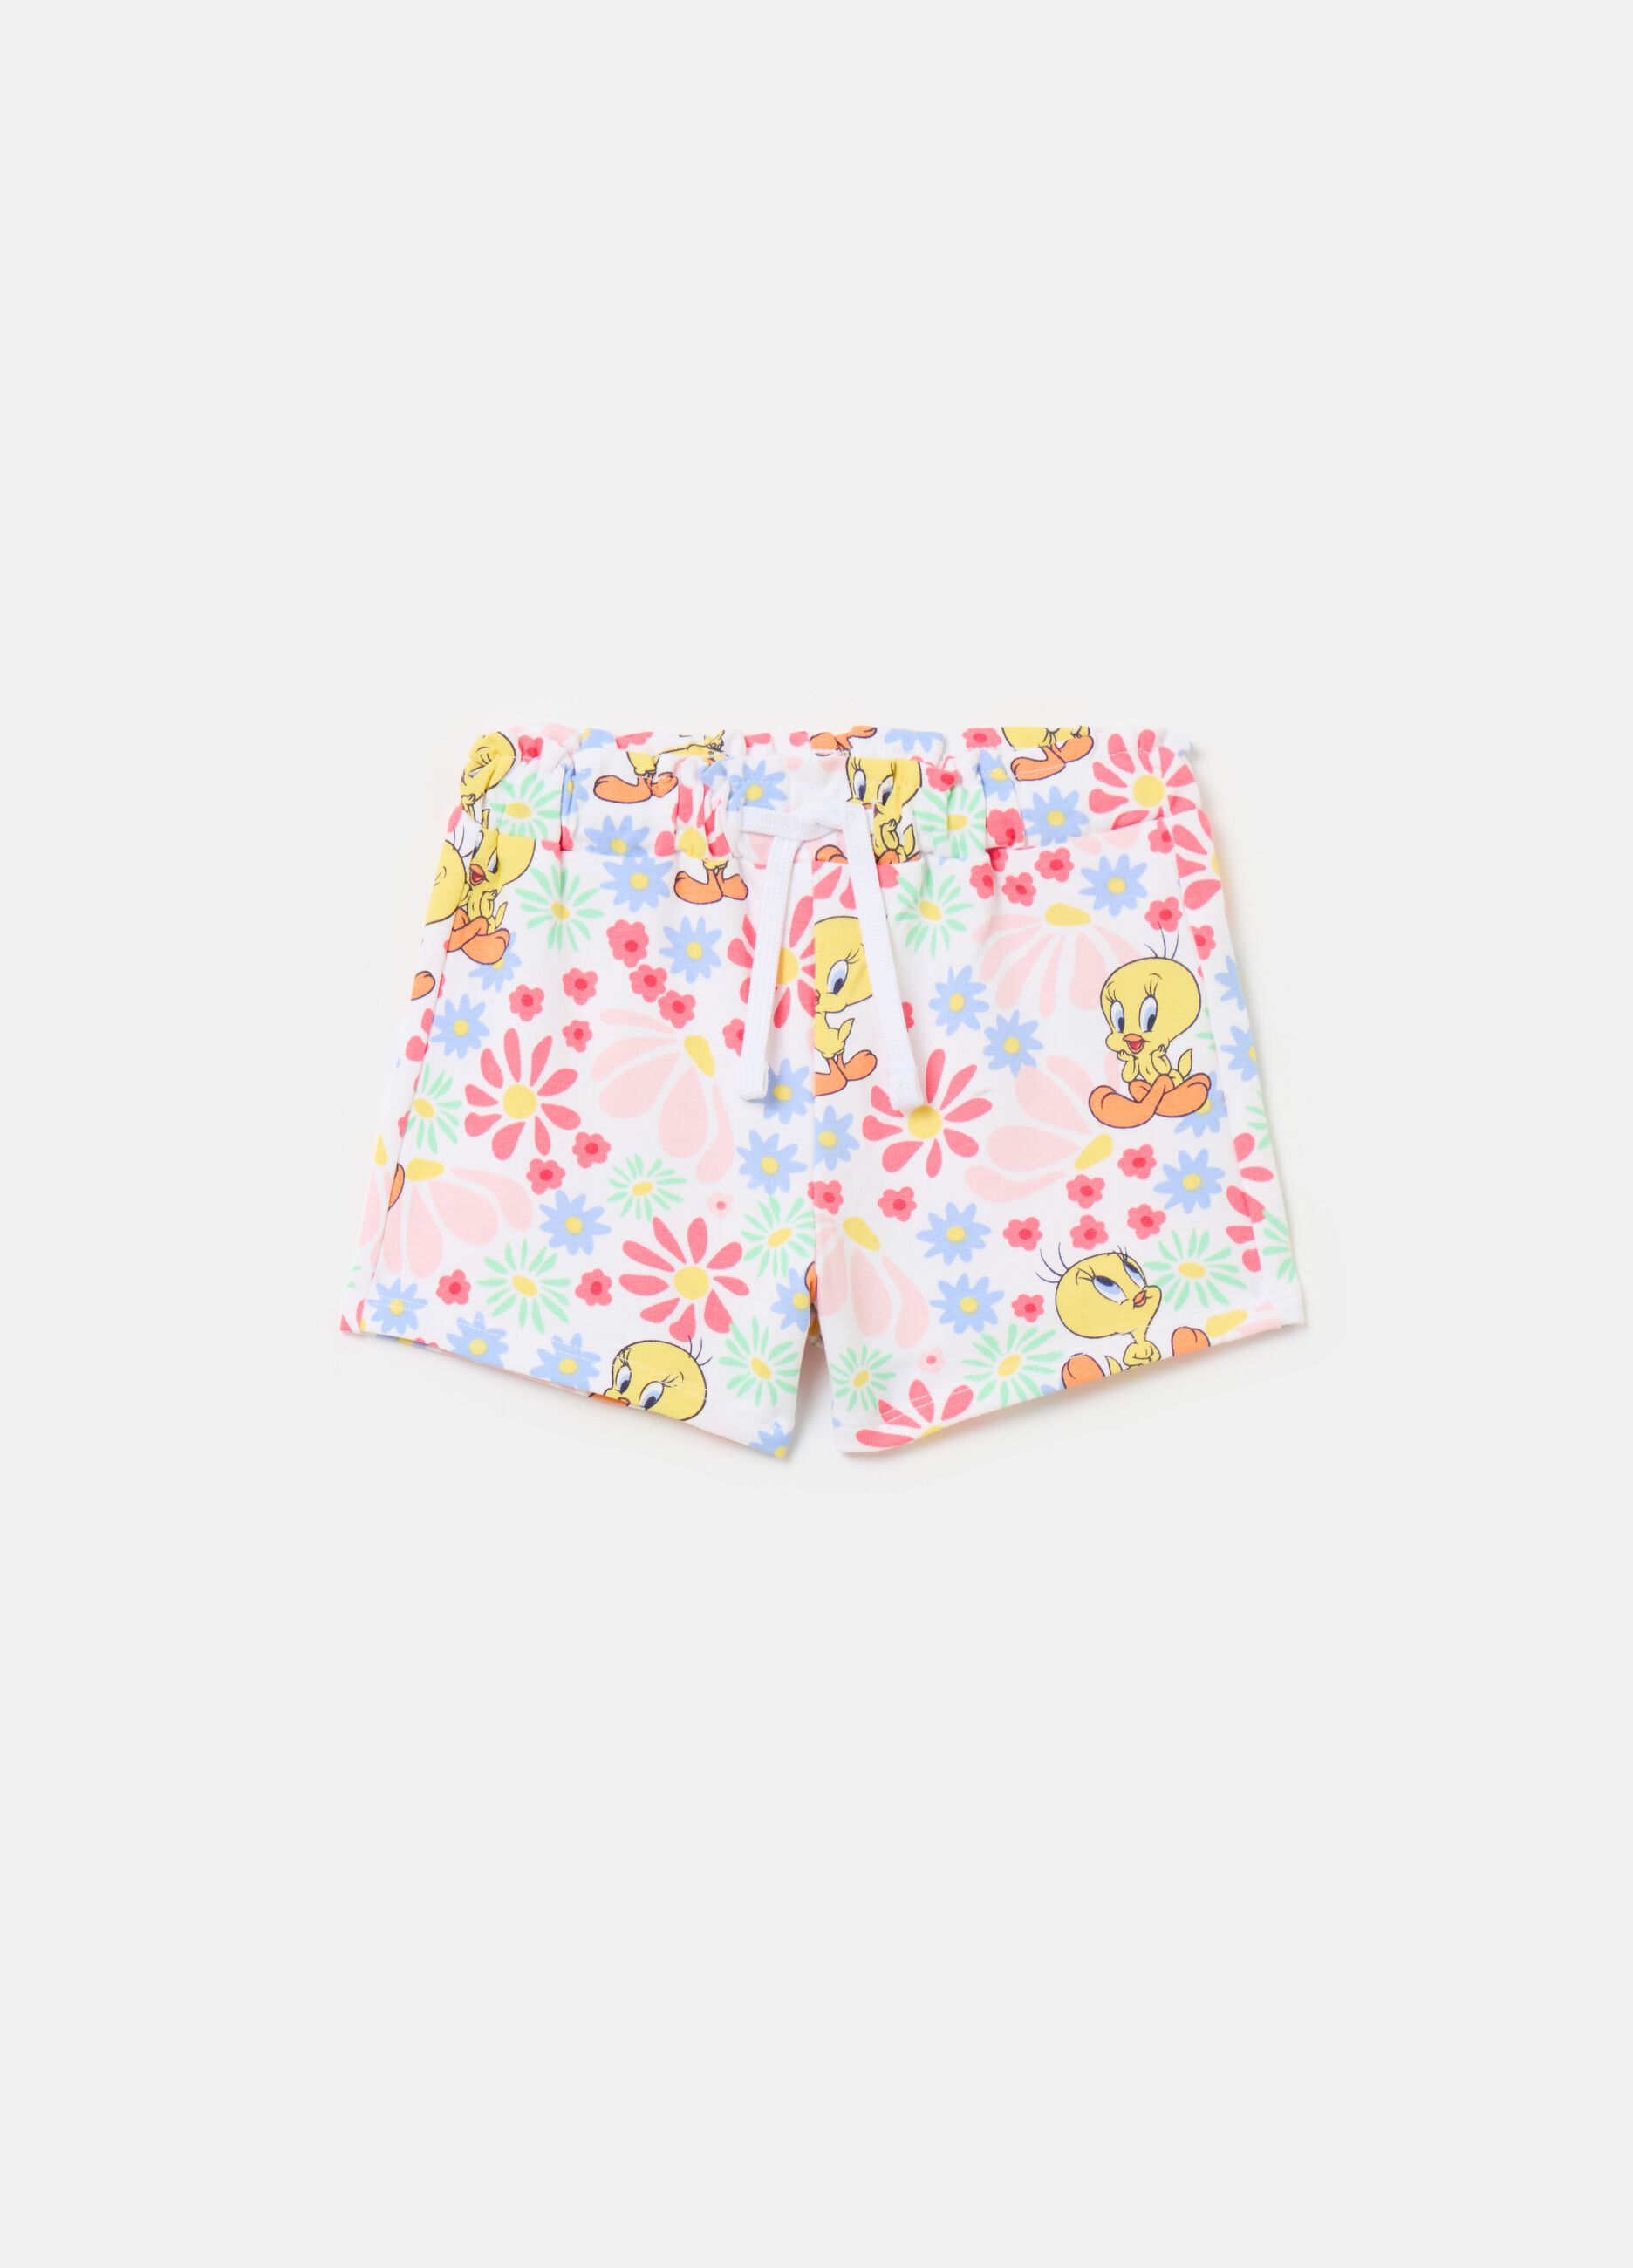 French terry shorts with Tweetie Pie print